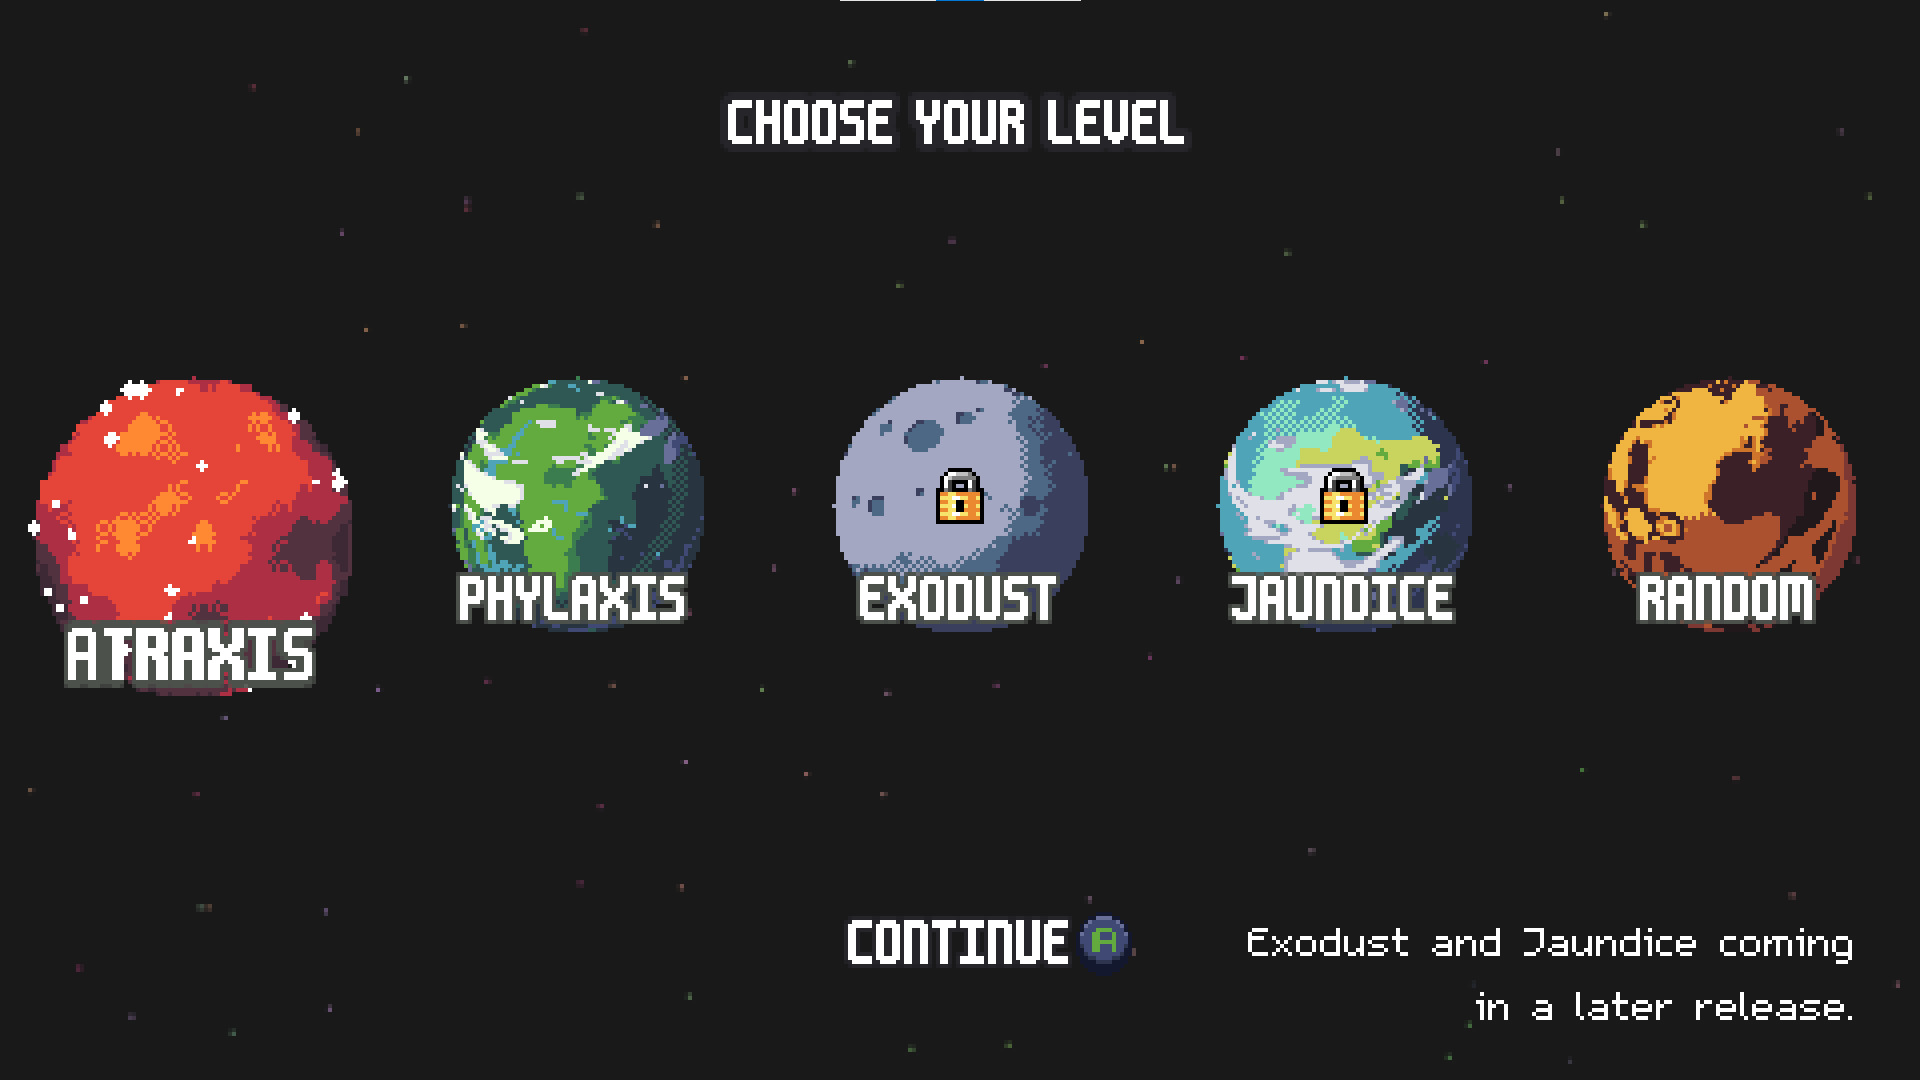 Dastardly level select screen